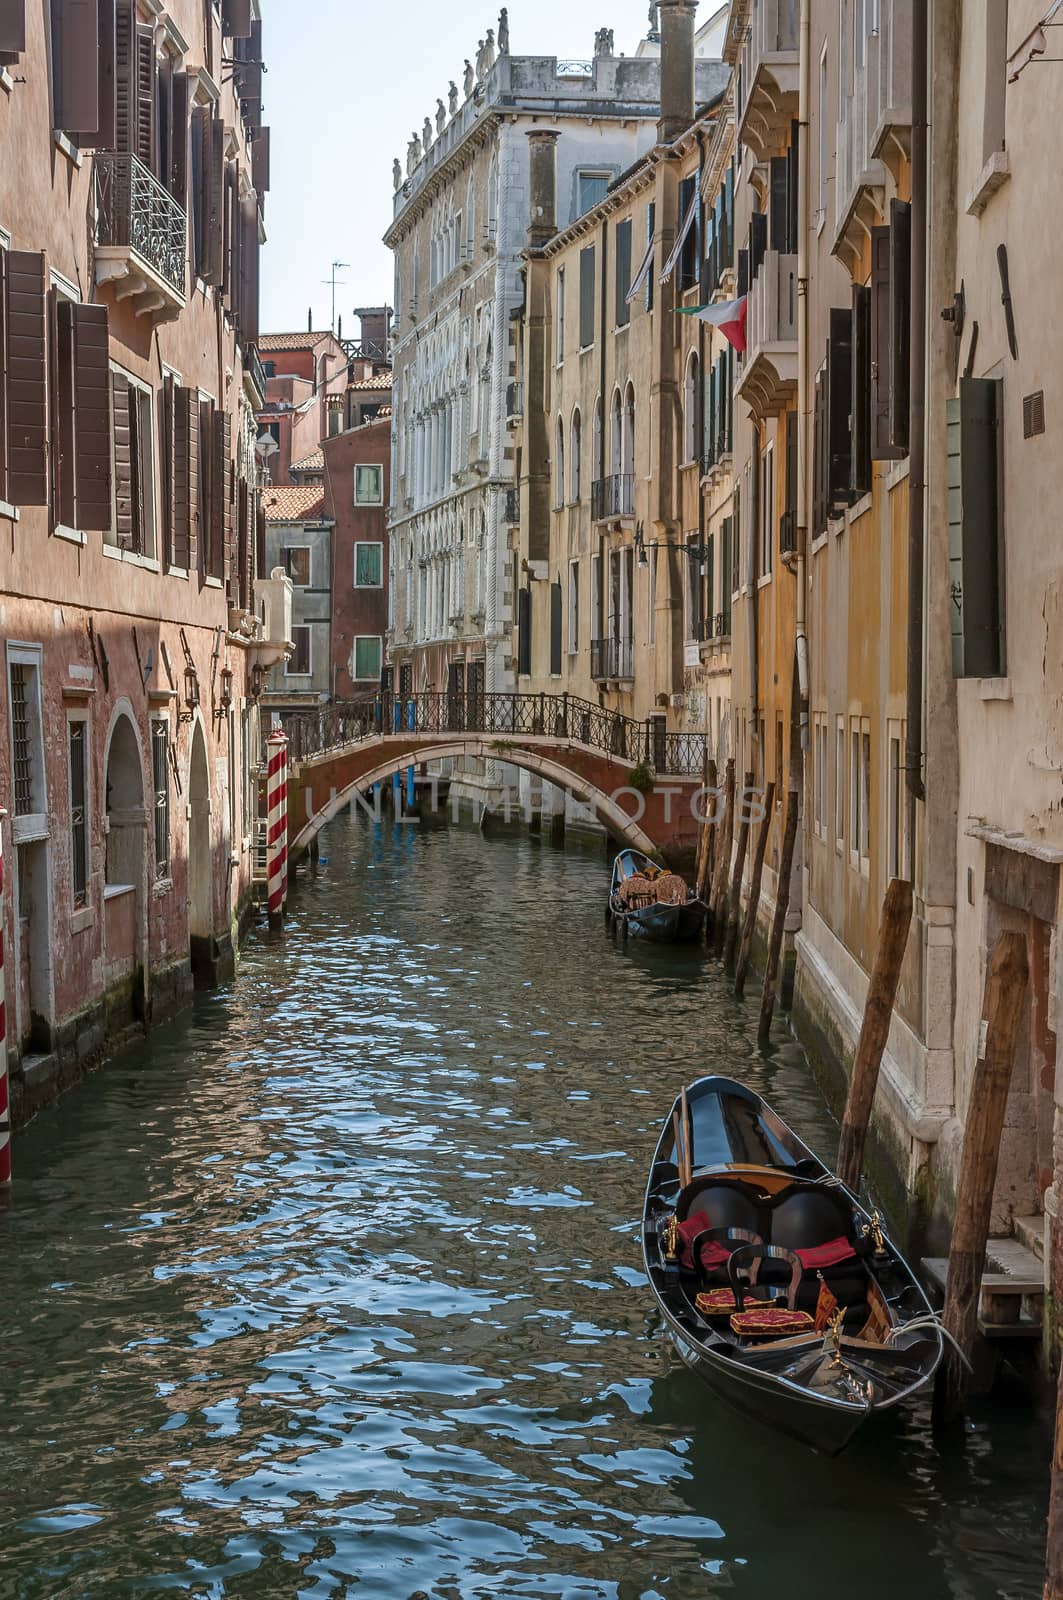 View of a canal, gondolas, and typical buildings in Venice, Italy.